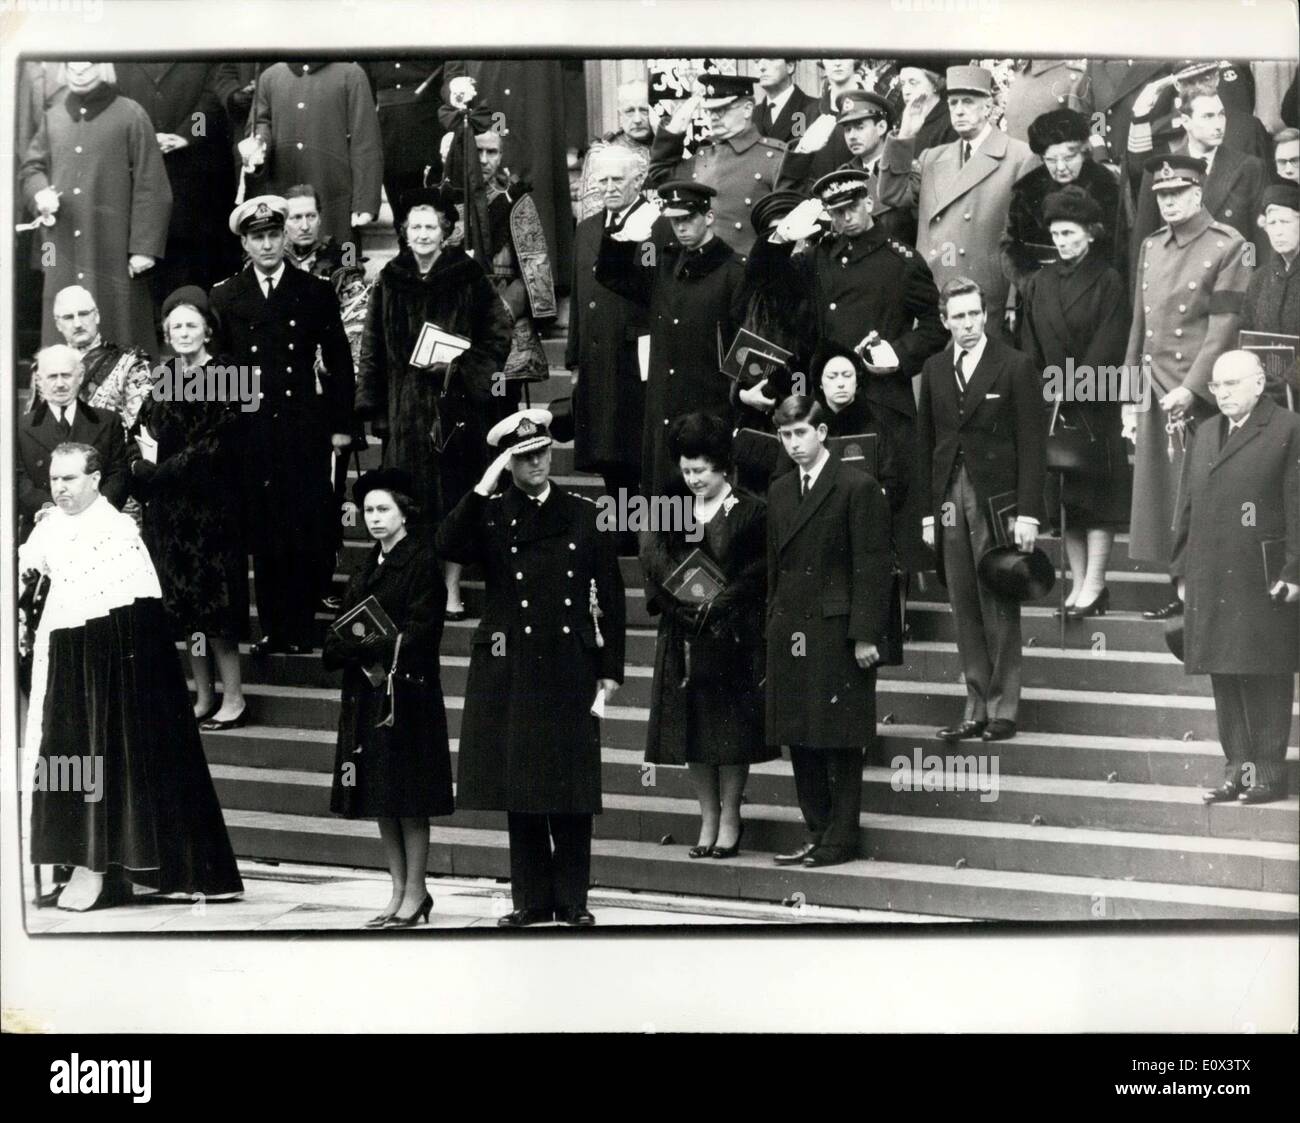 Jan. 30, 1965 - Funeral of Sir Winston Churchill. Royalty and state ...